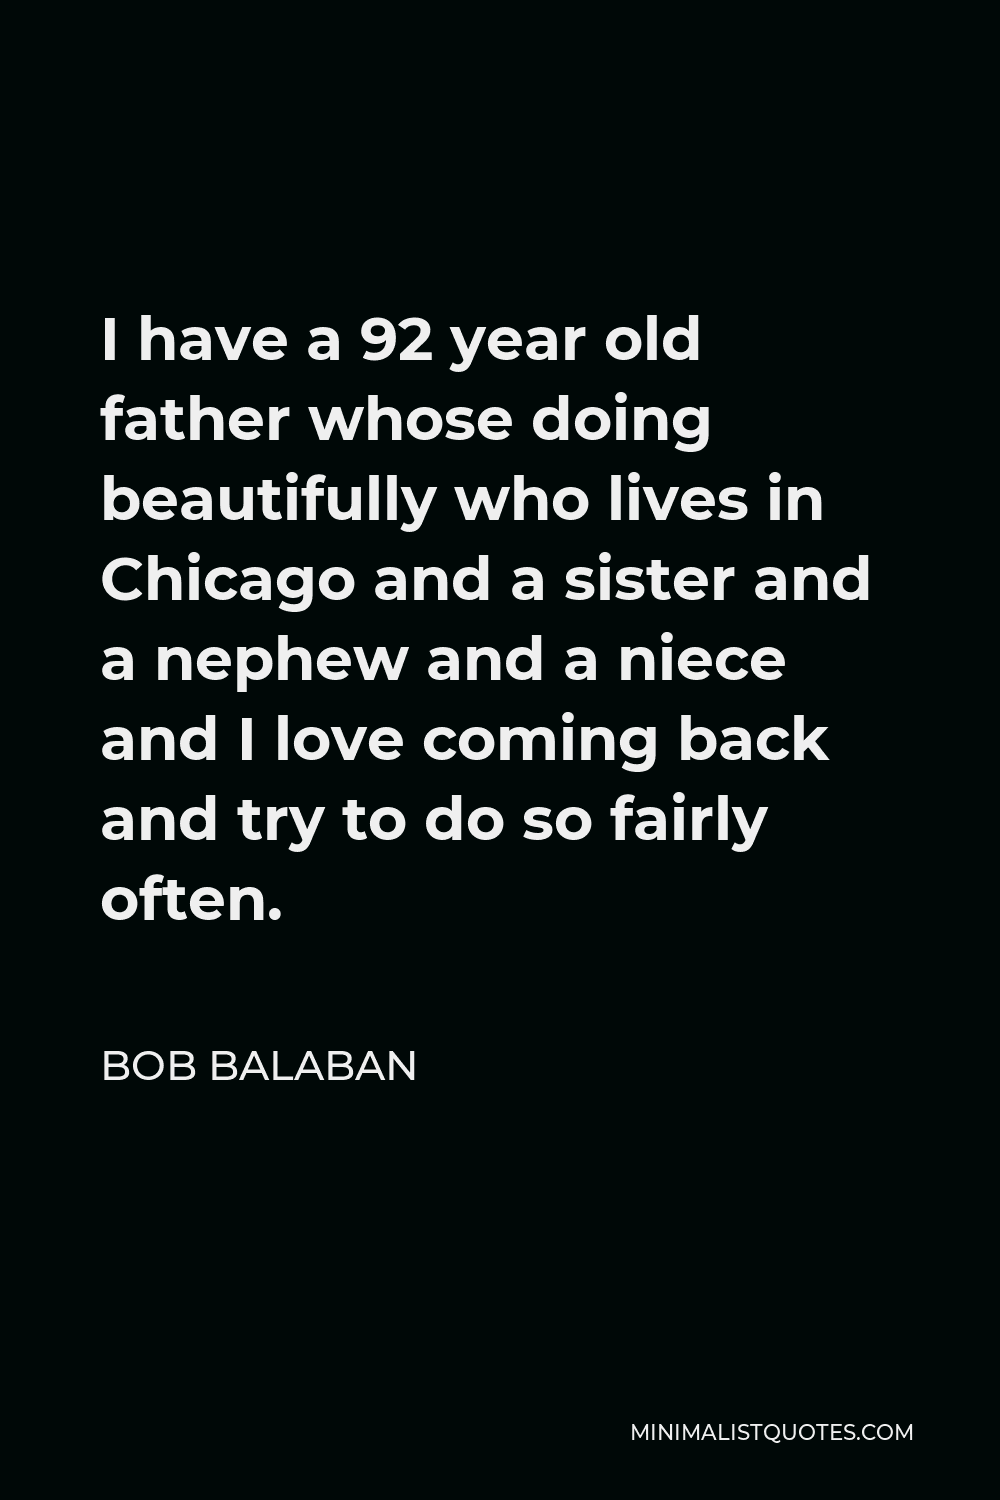 Bob Balaban Quote - I have a 92 year old father whose doing beautifully who lives in Chicago and a sister and a nephew and a niece and I love coming back and try to do so fairly often.